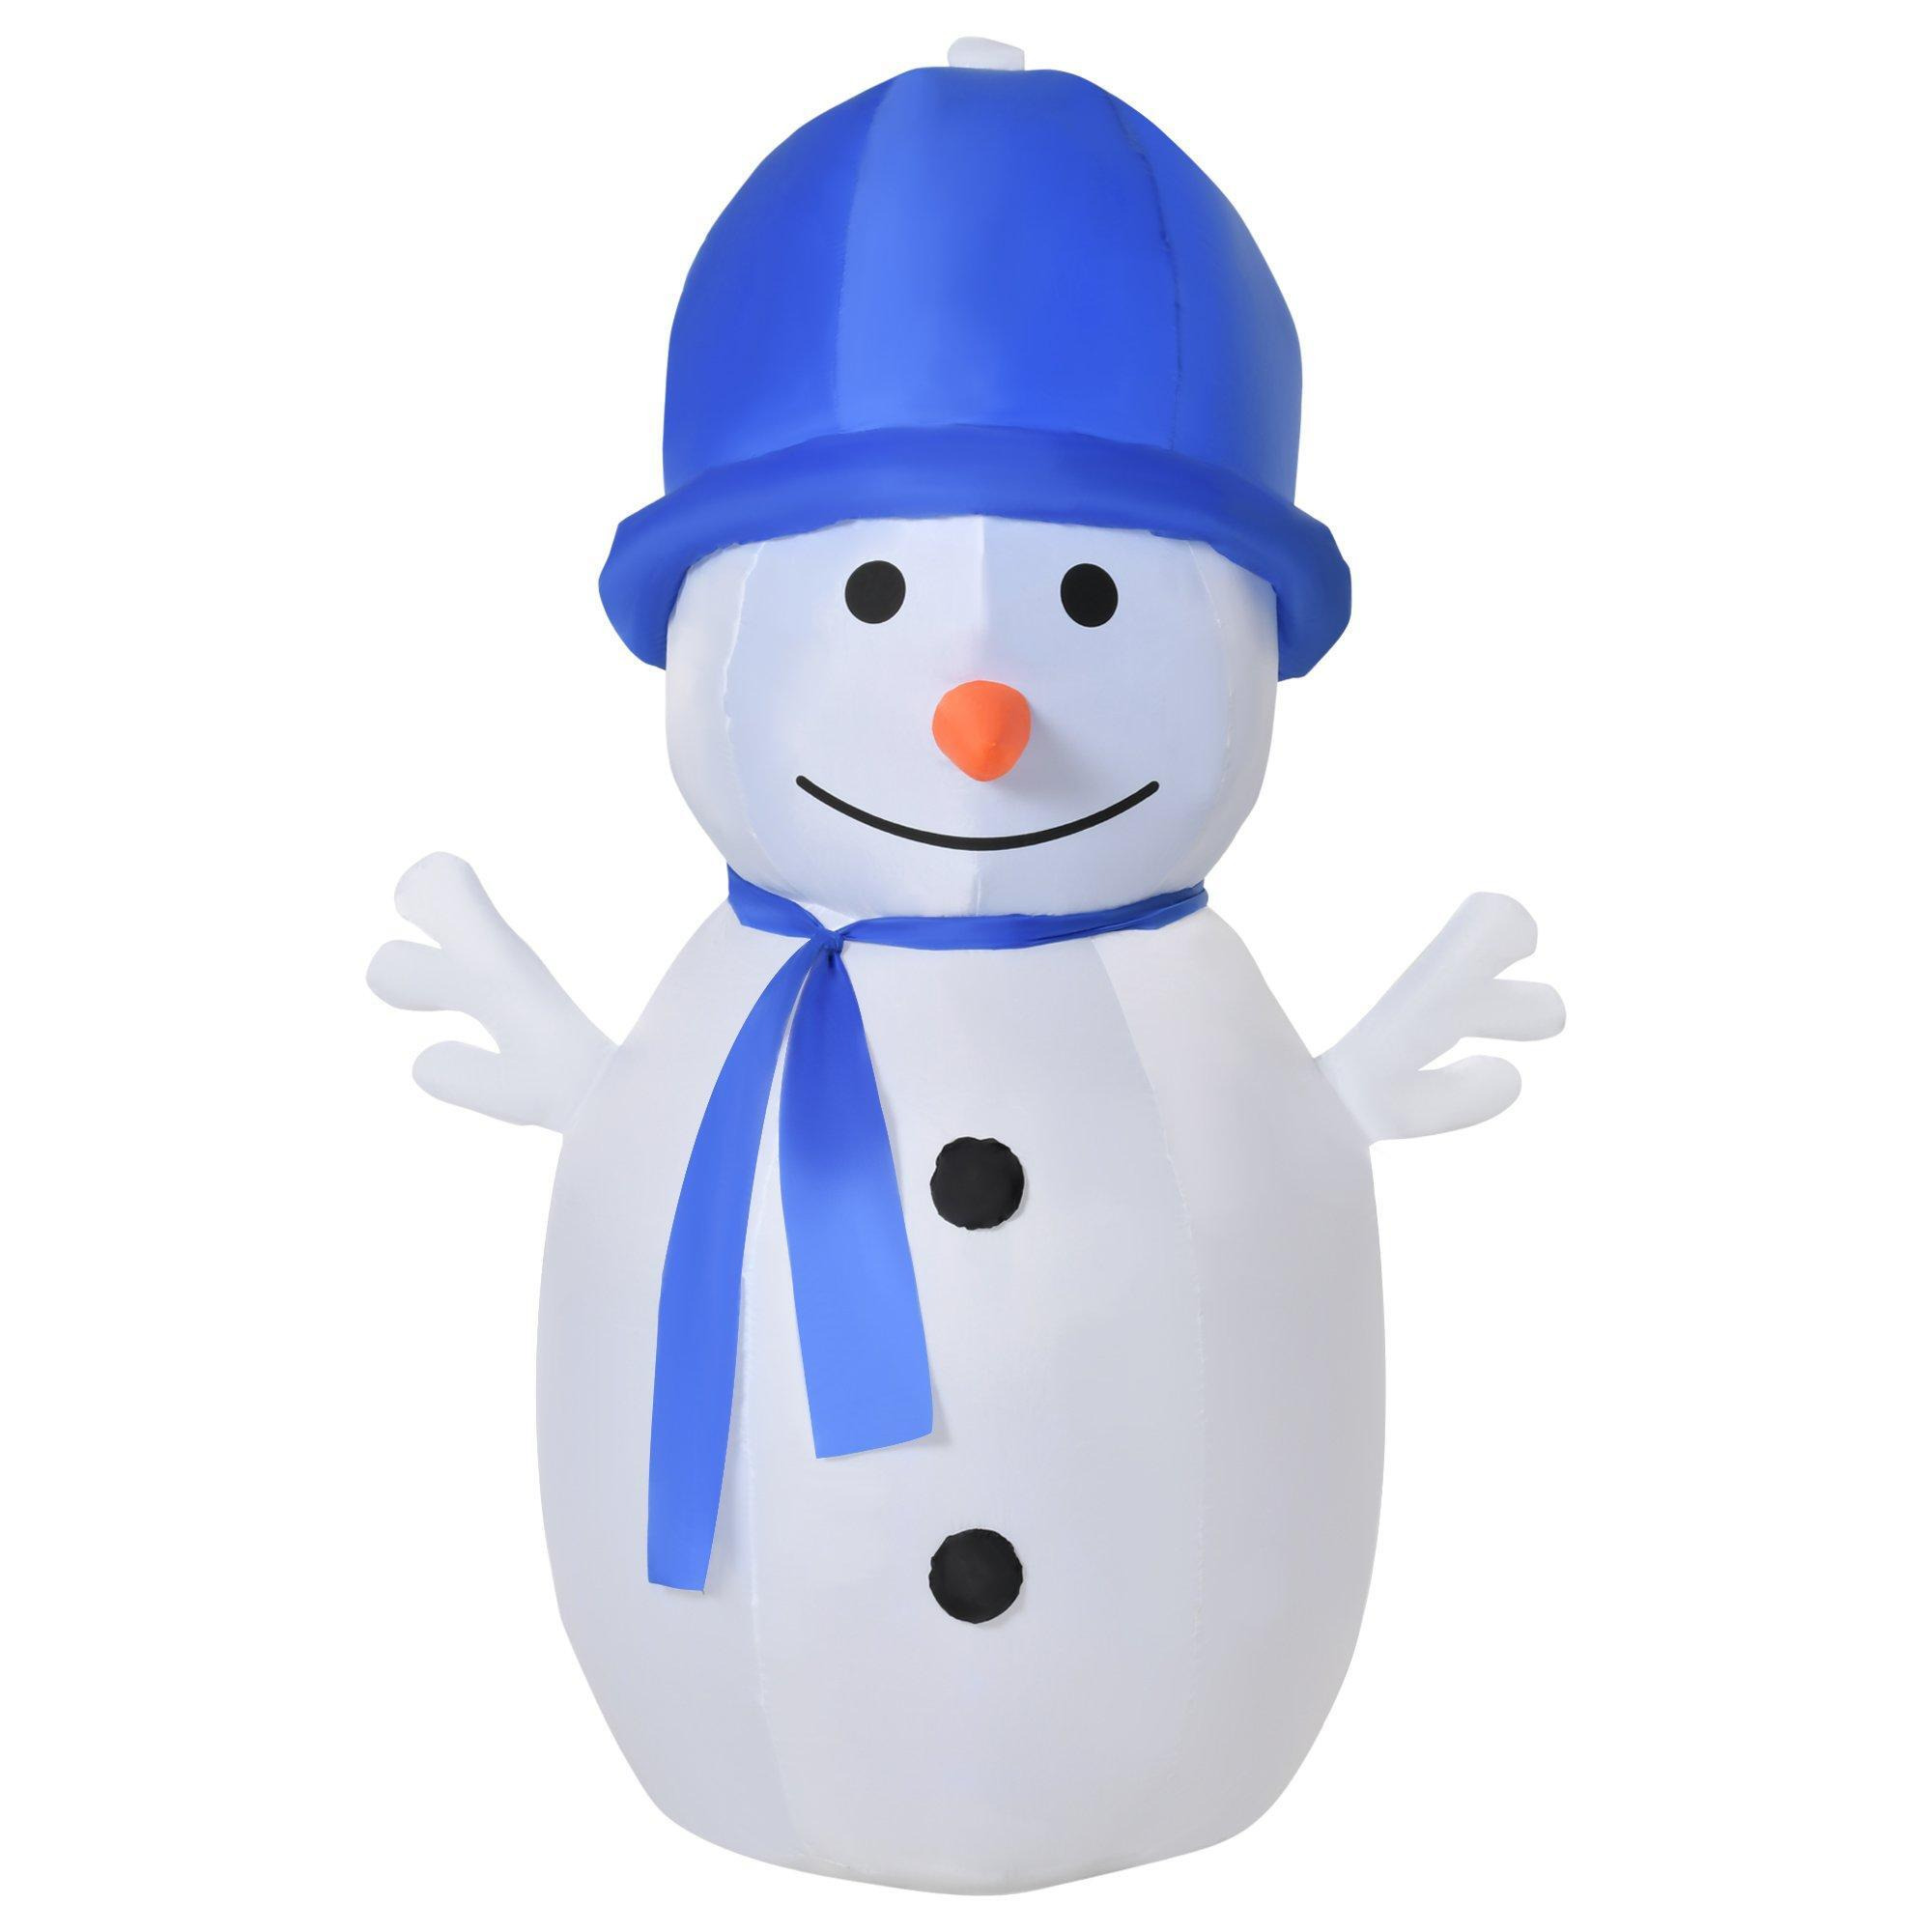 6ft Christmas Inflatable Snowman Outdoor Blow Up Decoration - image 1